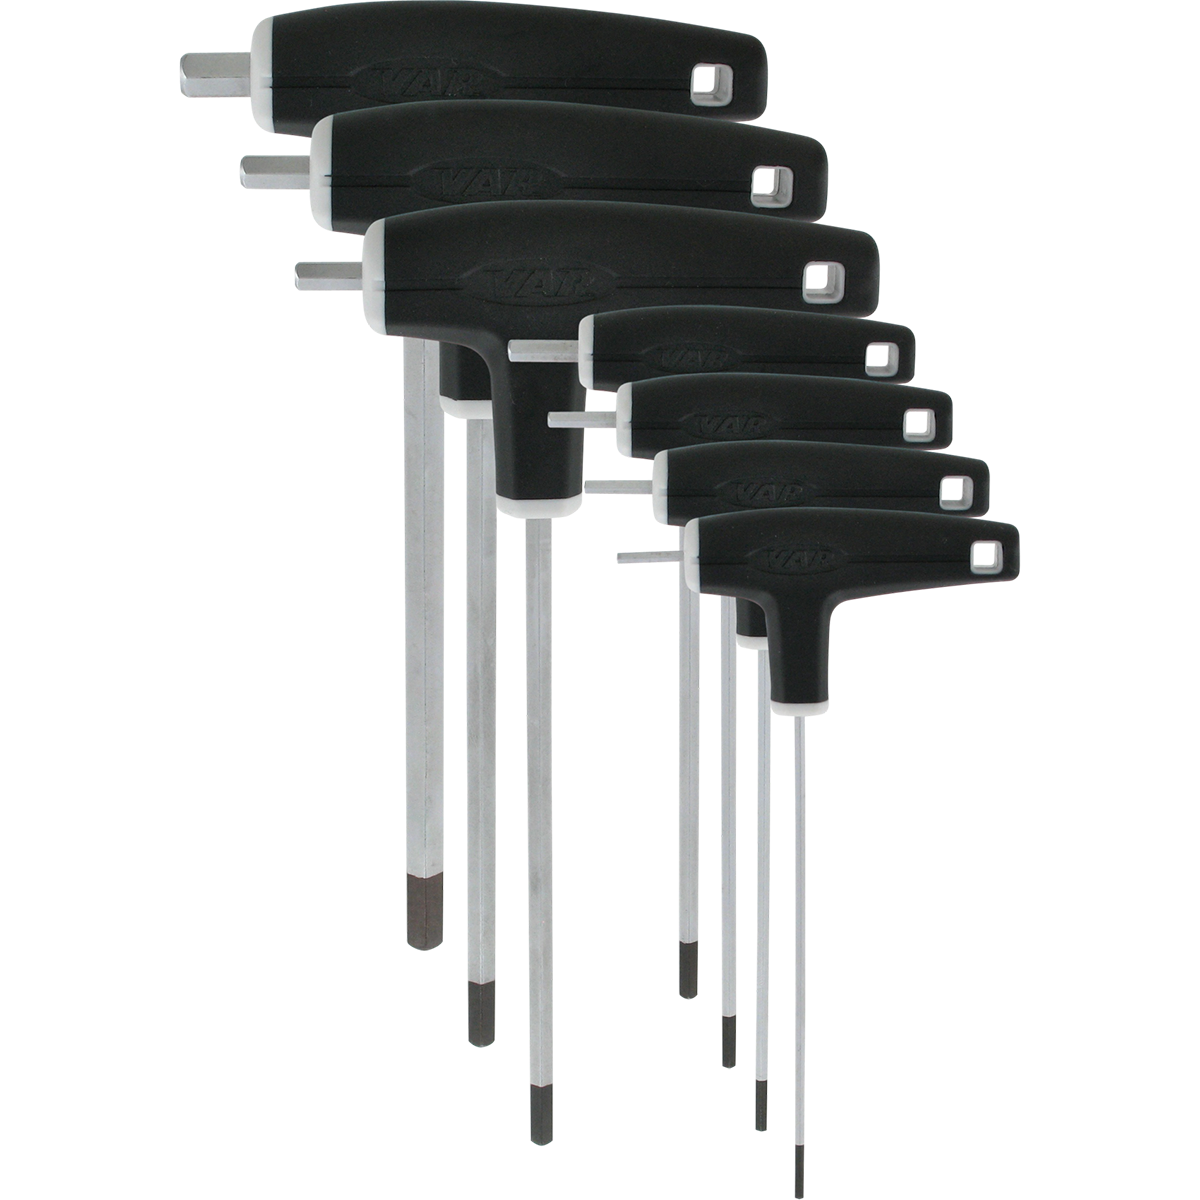 Set 7 P-handled hex wrenches from 2 to 8mm